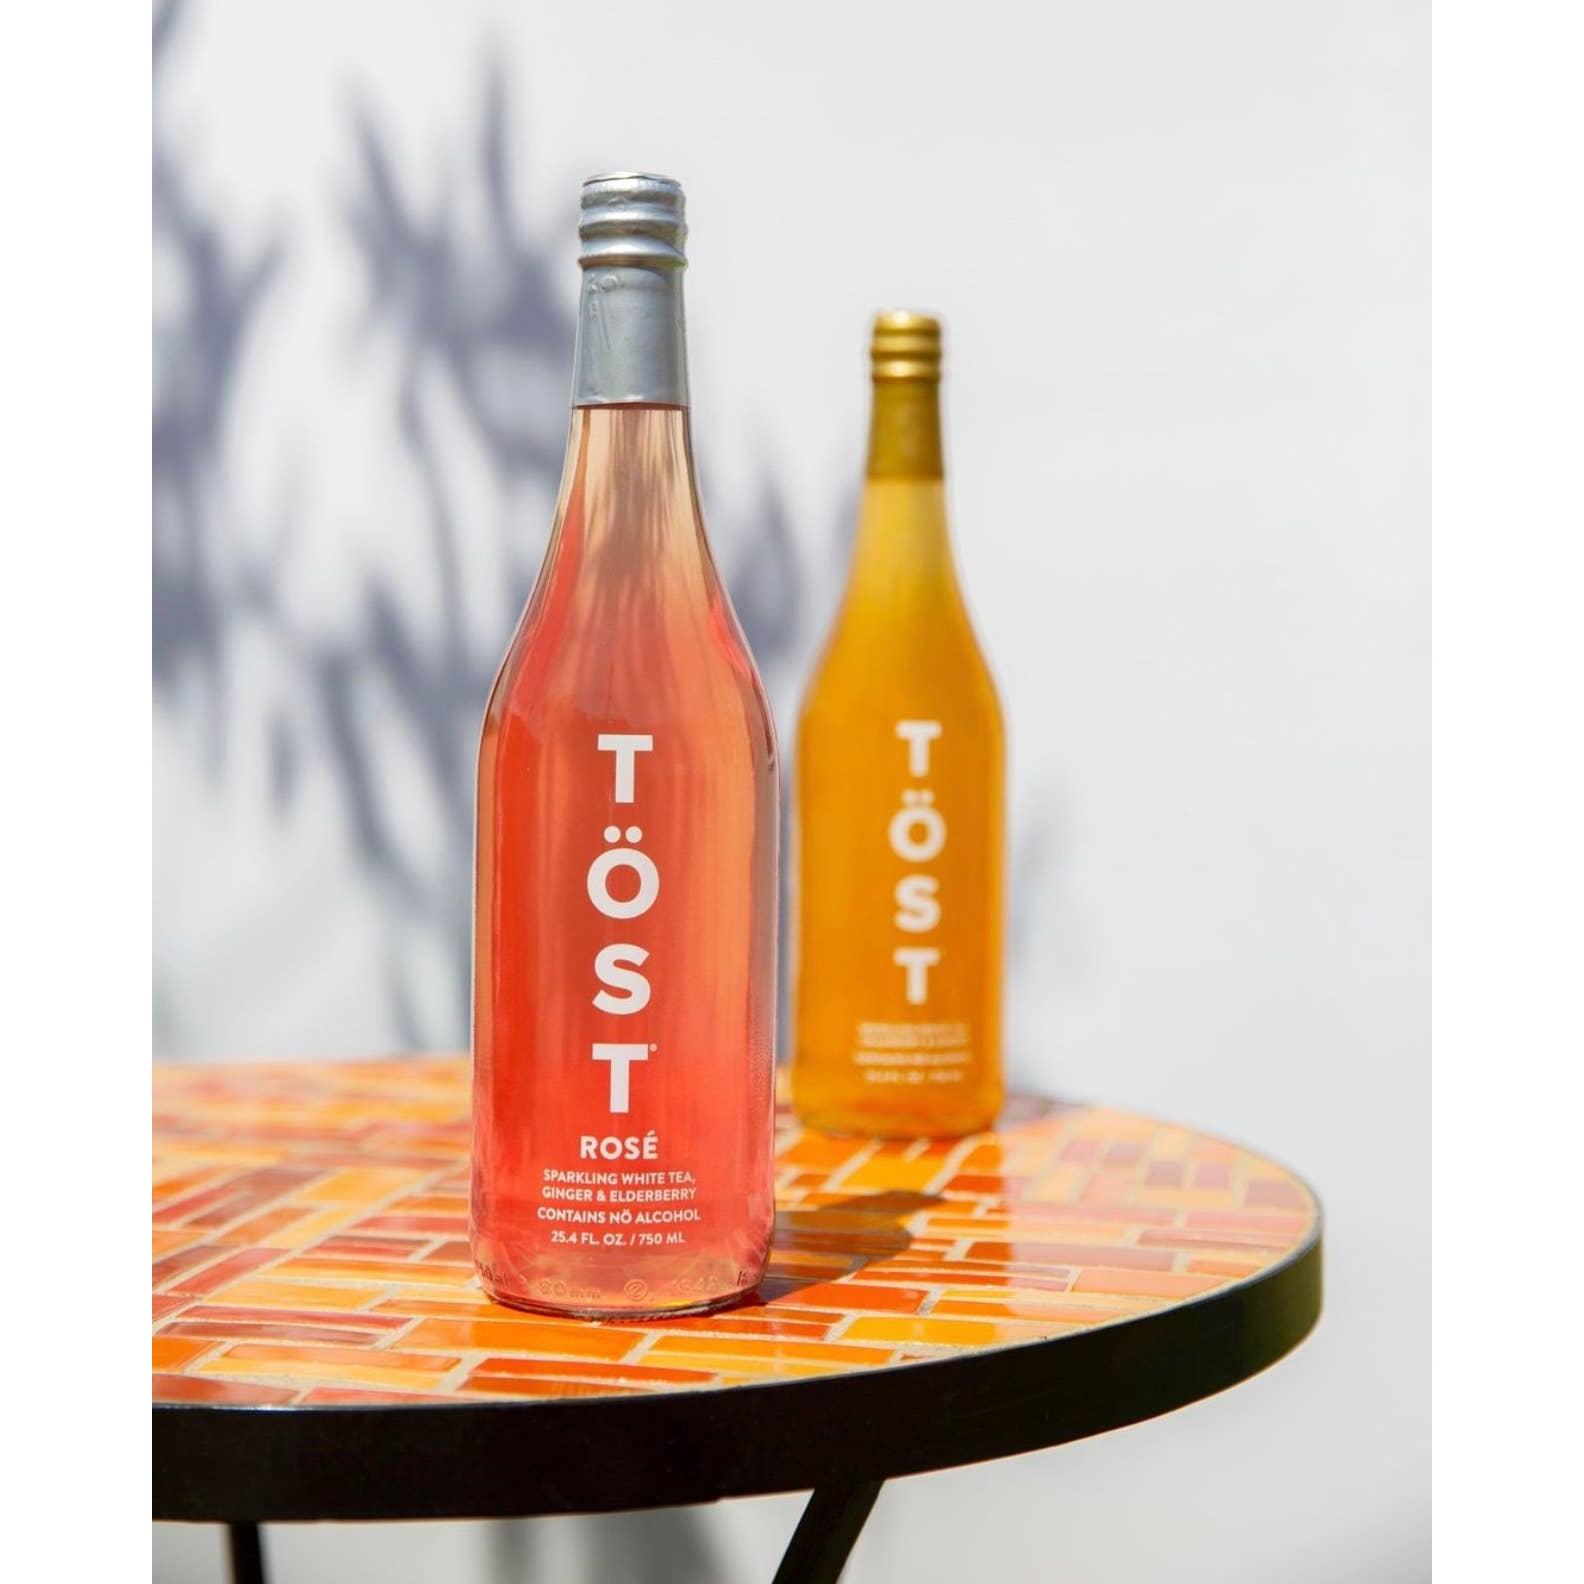 Two bottles of TÖST ROSÉ a Non-Alcoholic Refresher, one from TÖST Beverages and one original, on a small round table with a mosaic pattern.